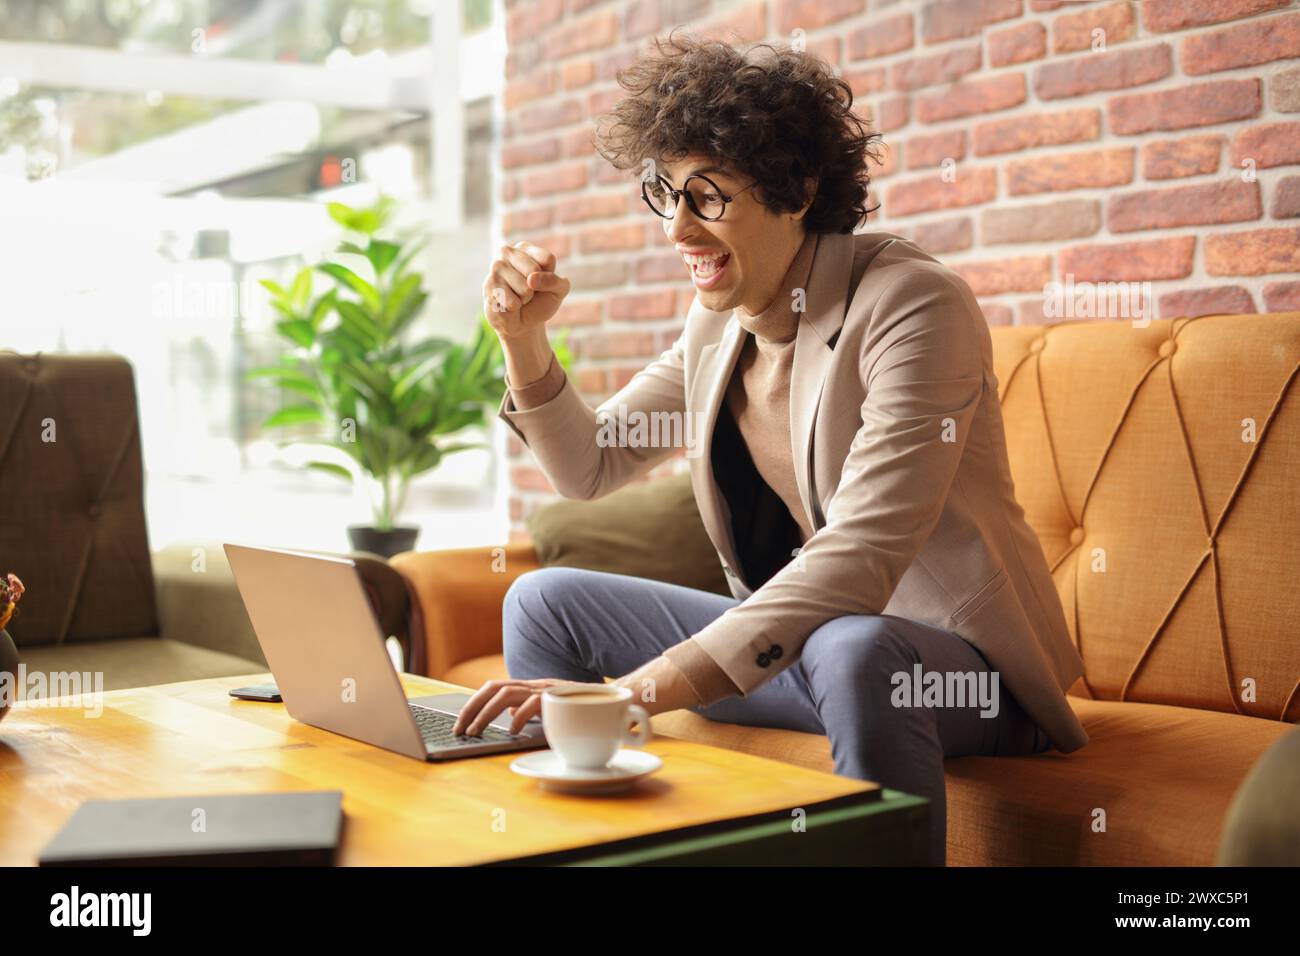 Happy young man sitting in a cafe and using a laptop computer Stock Photo